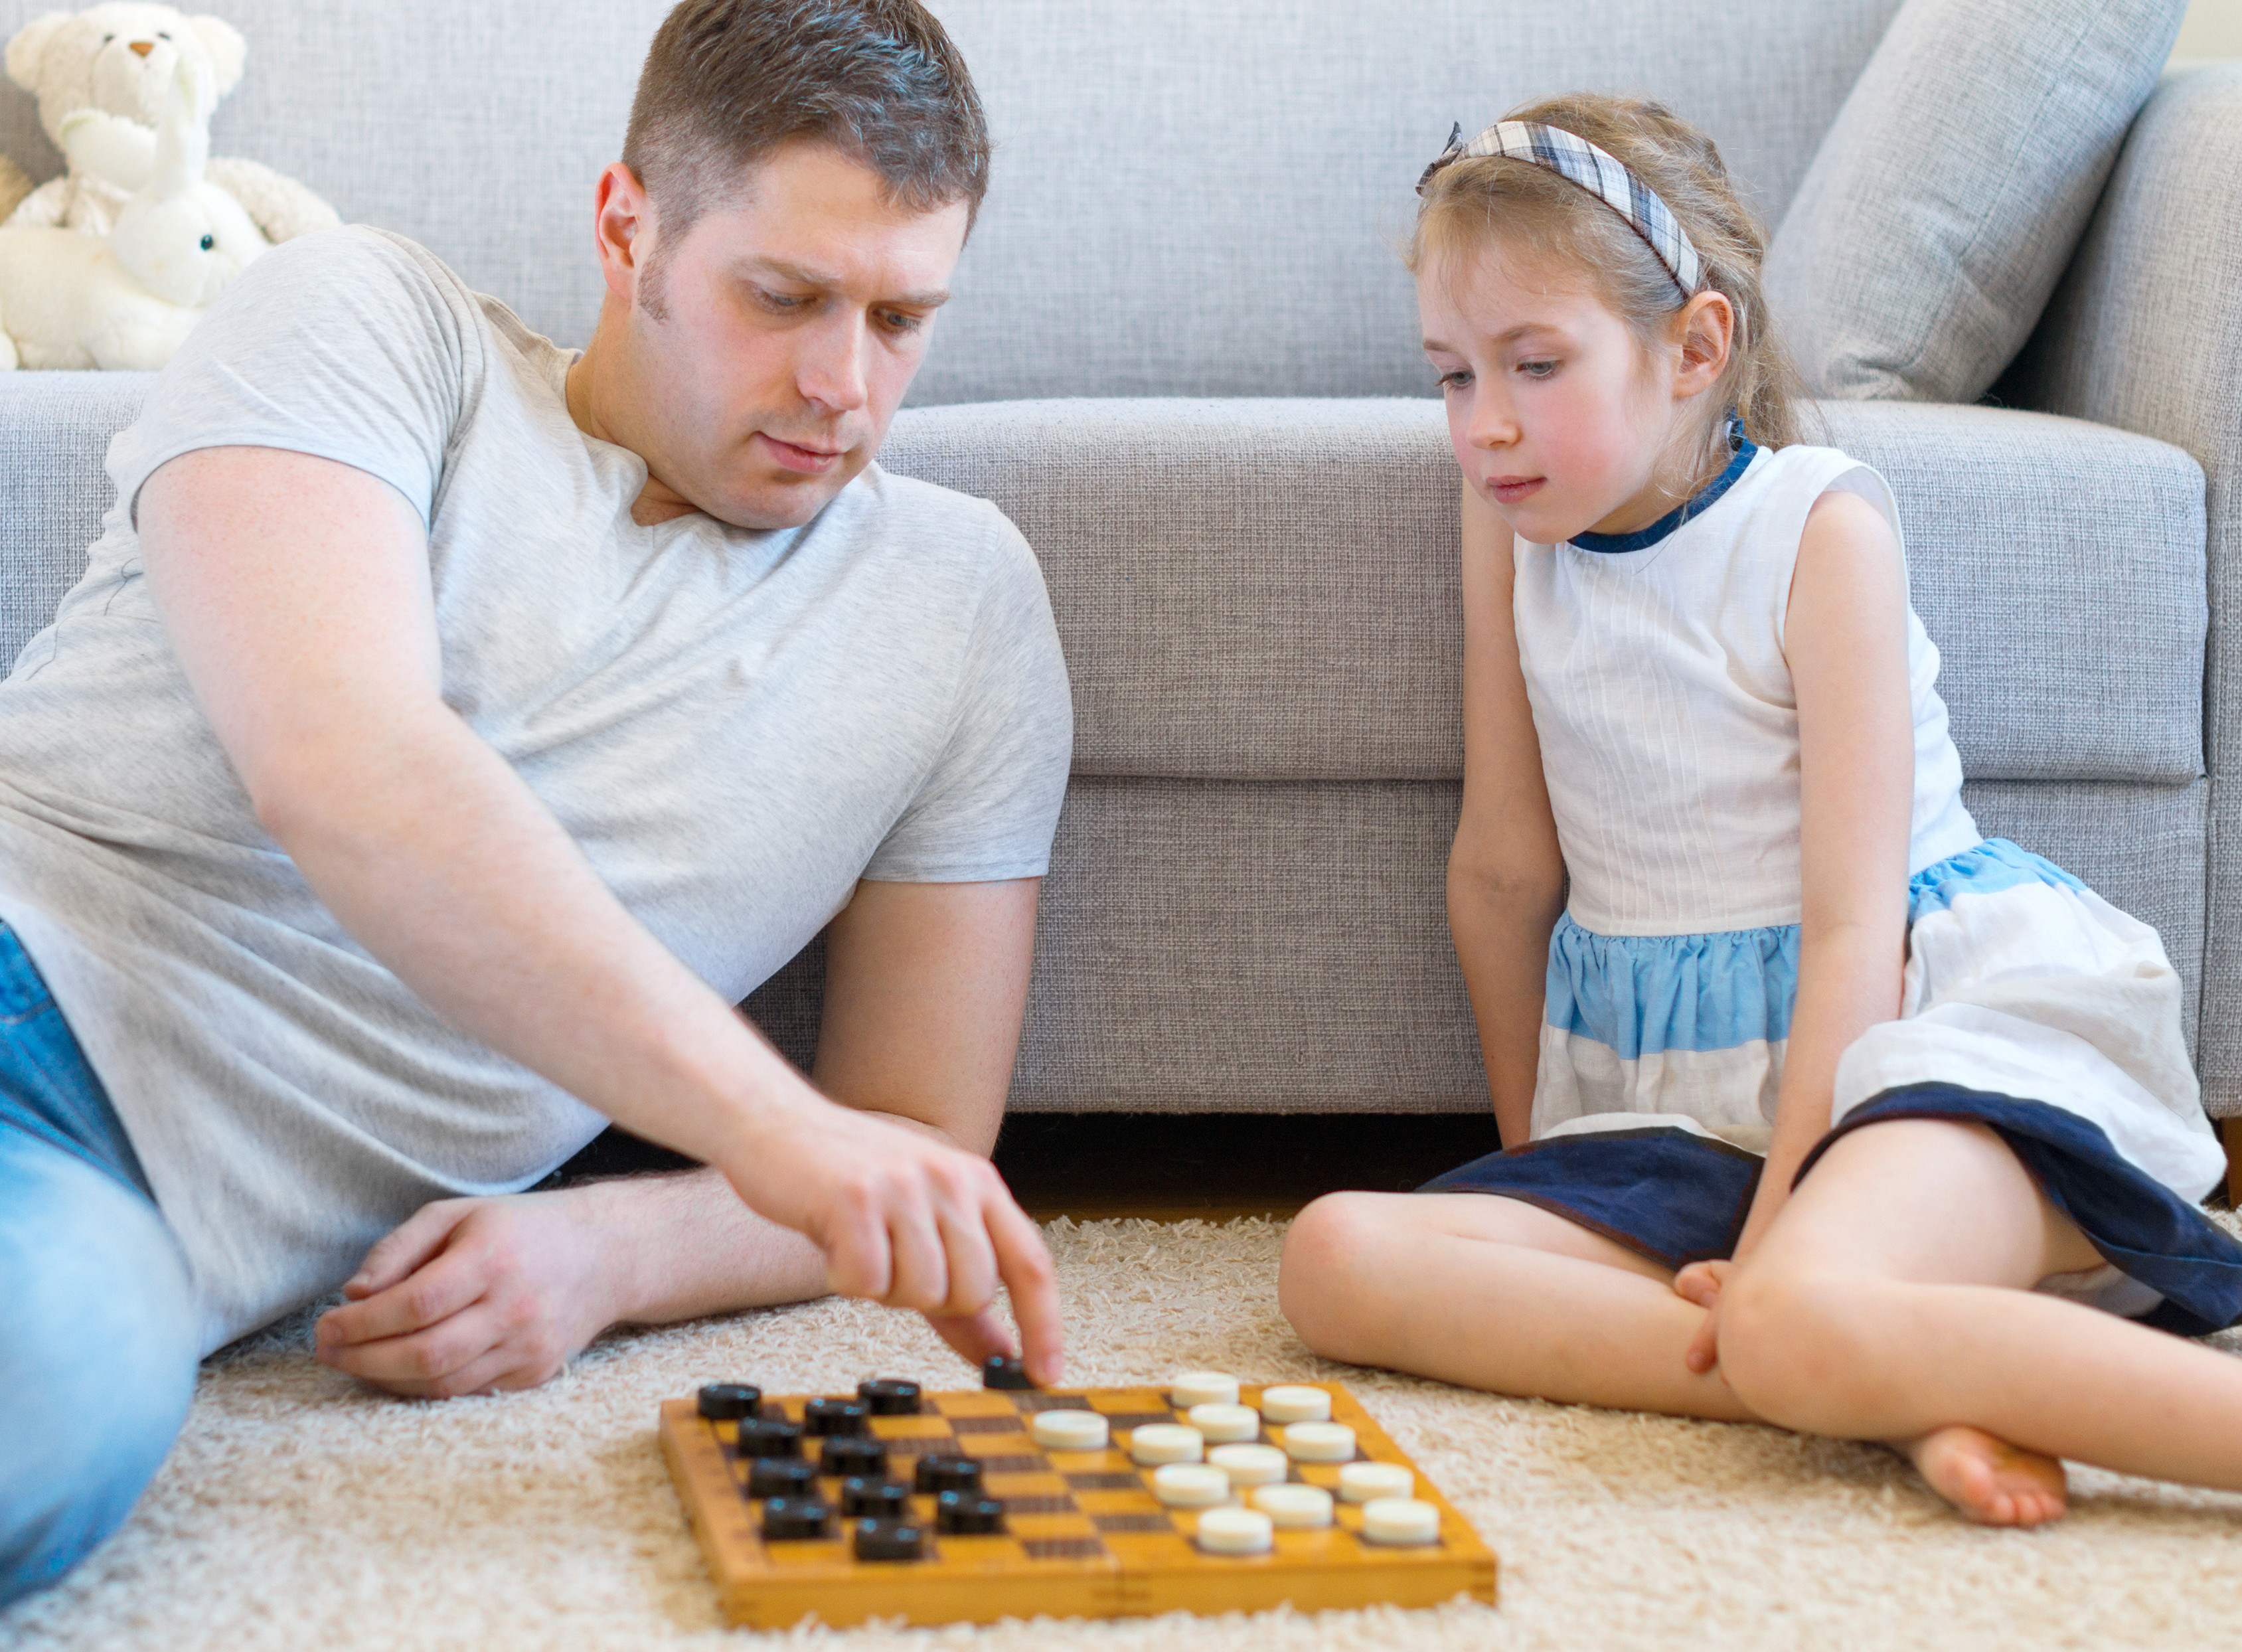 Stepdaughter and stepfather playing checkers.